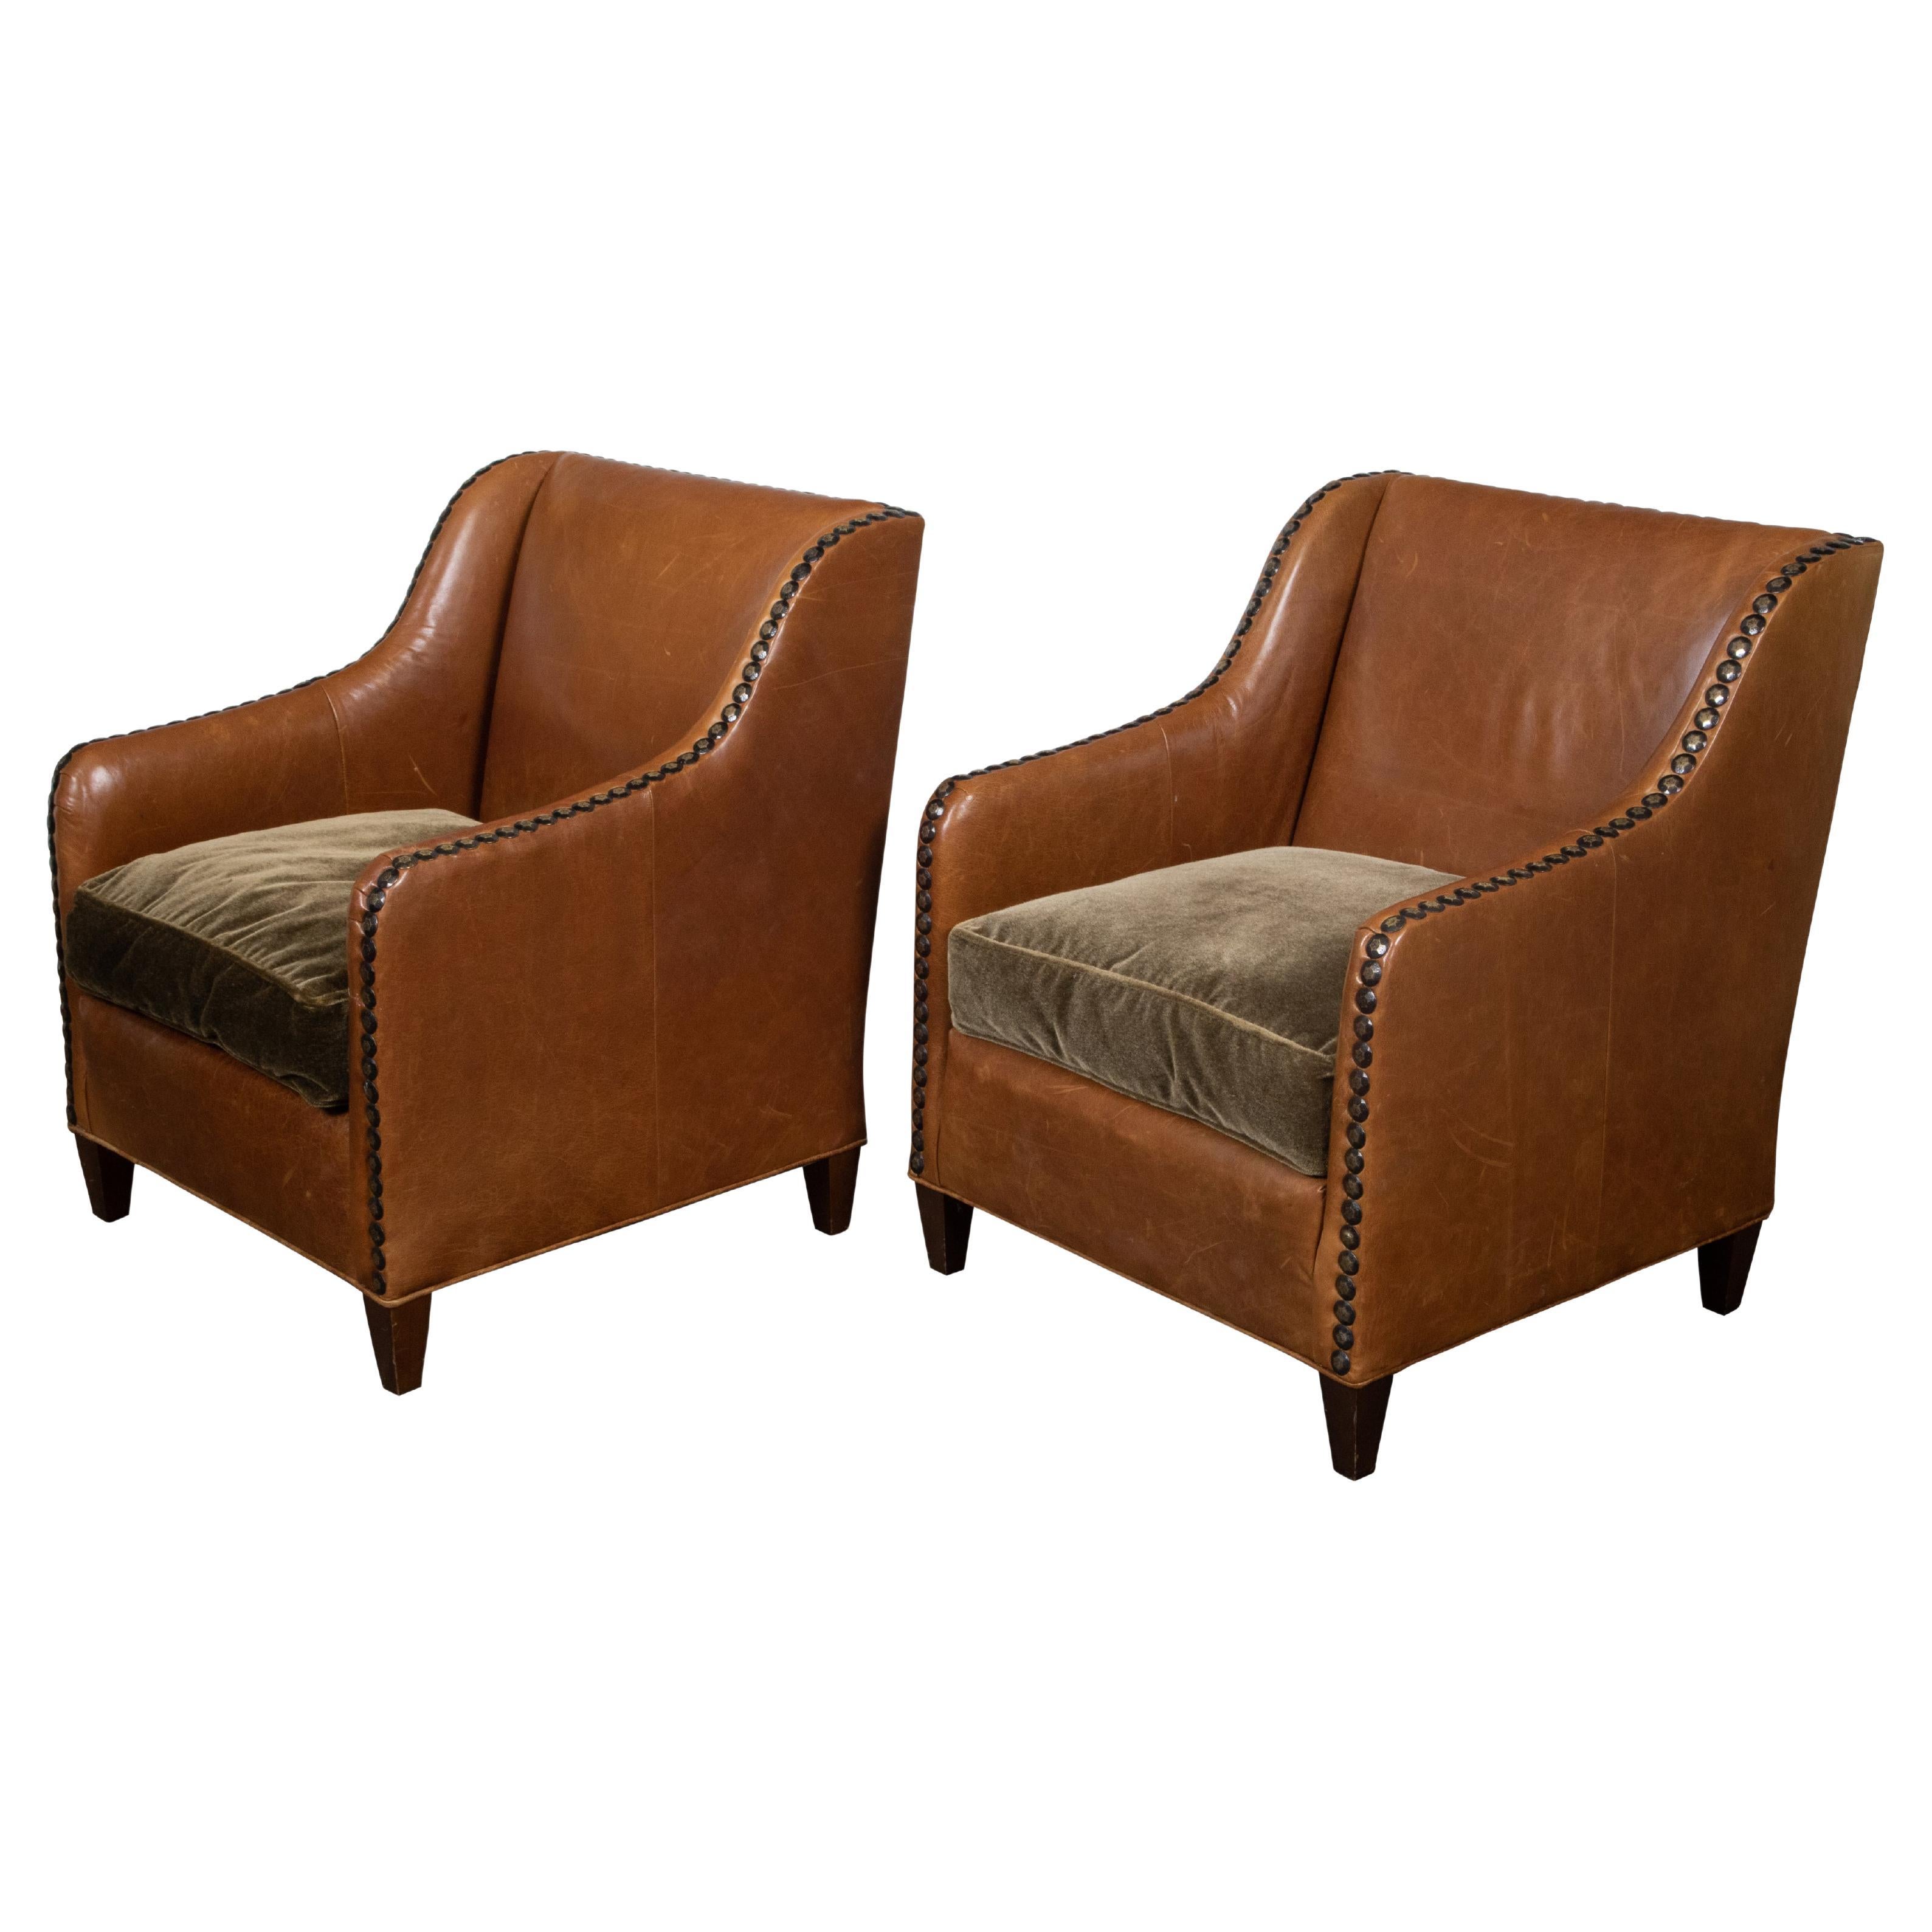 English Midcentury Brown Leather Club Chairs with Velvet Cushions and Nailheads